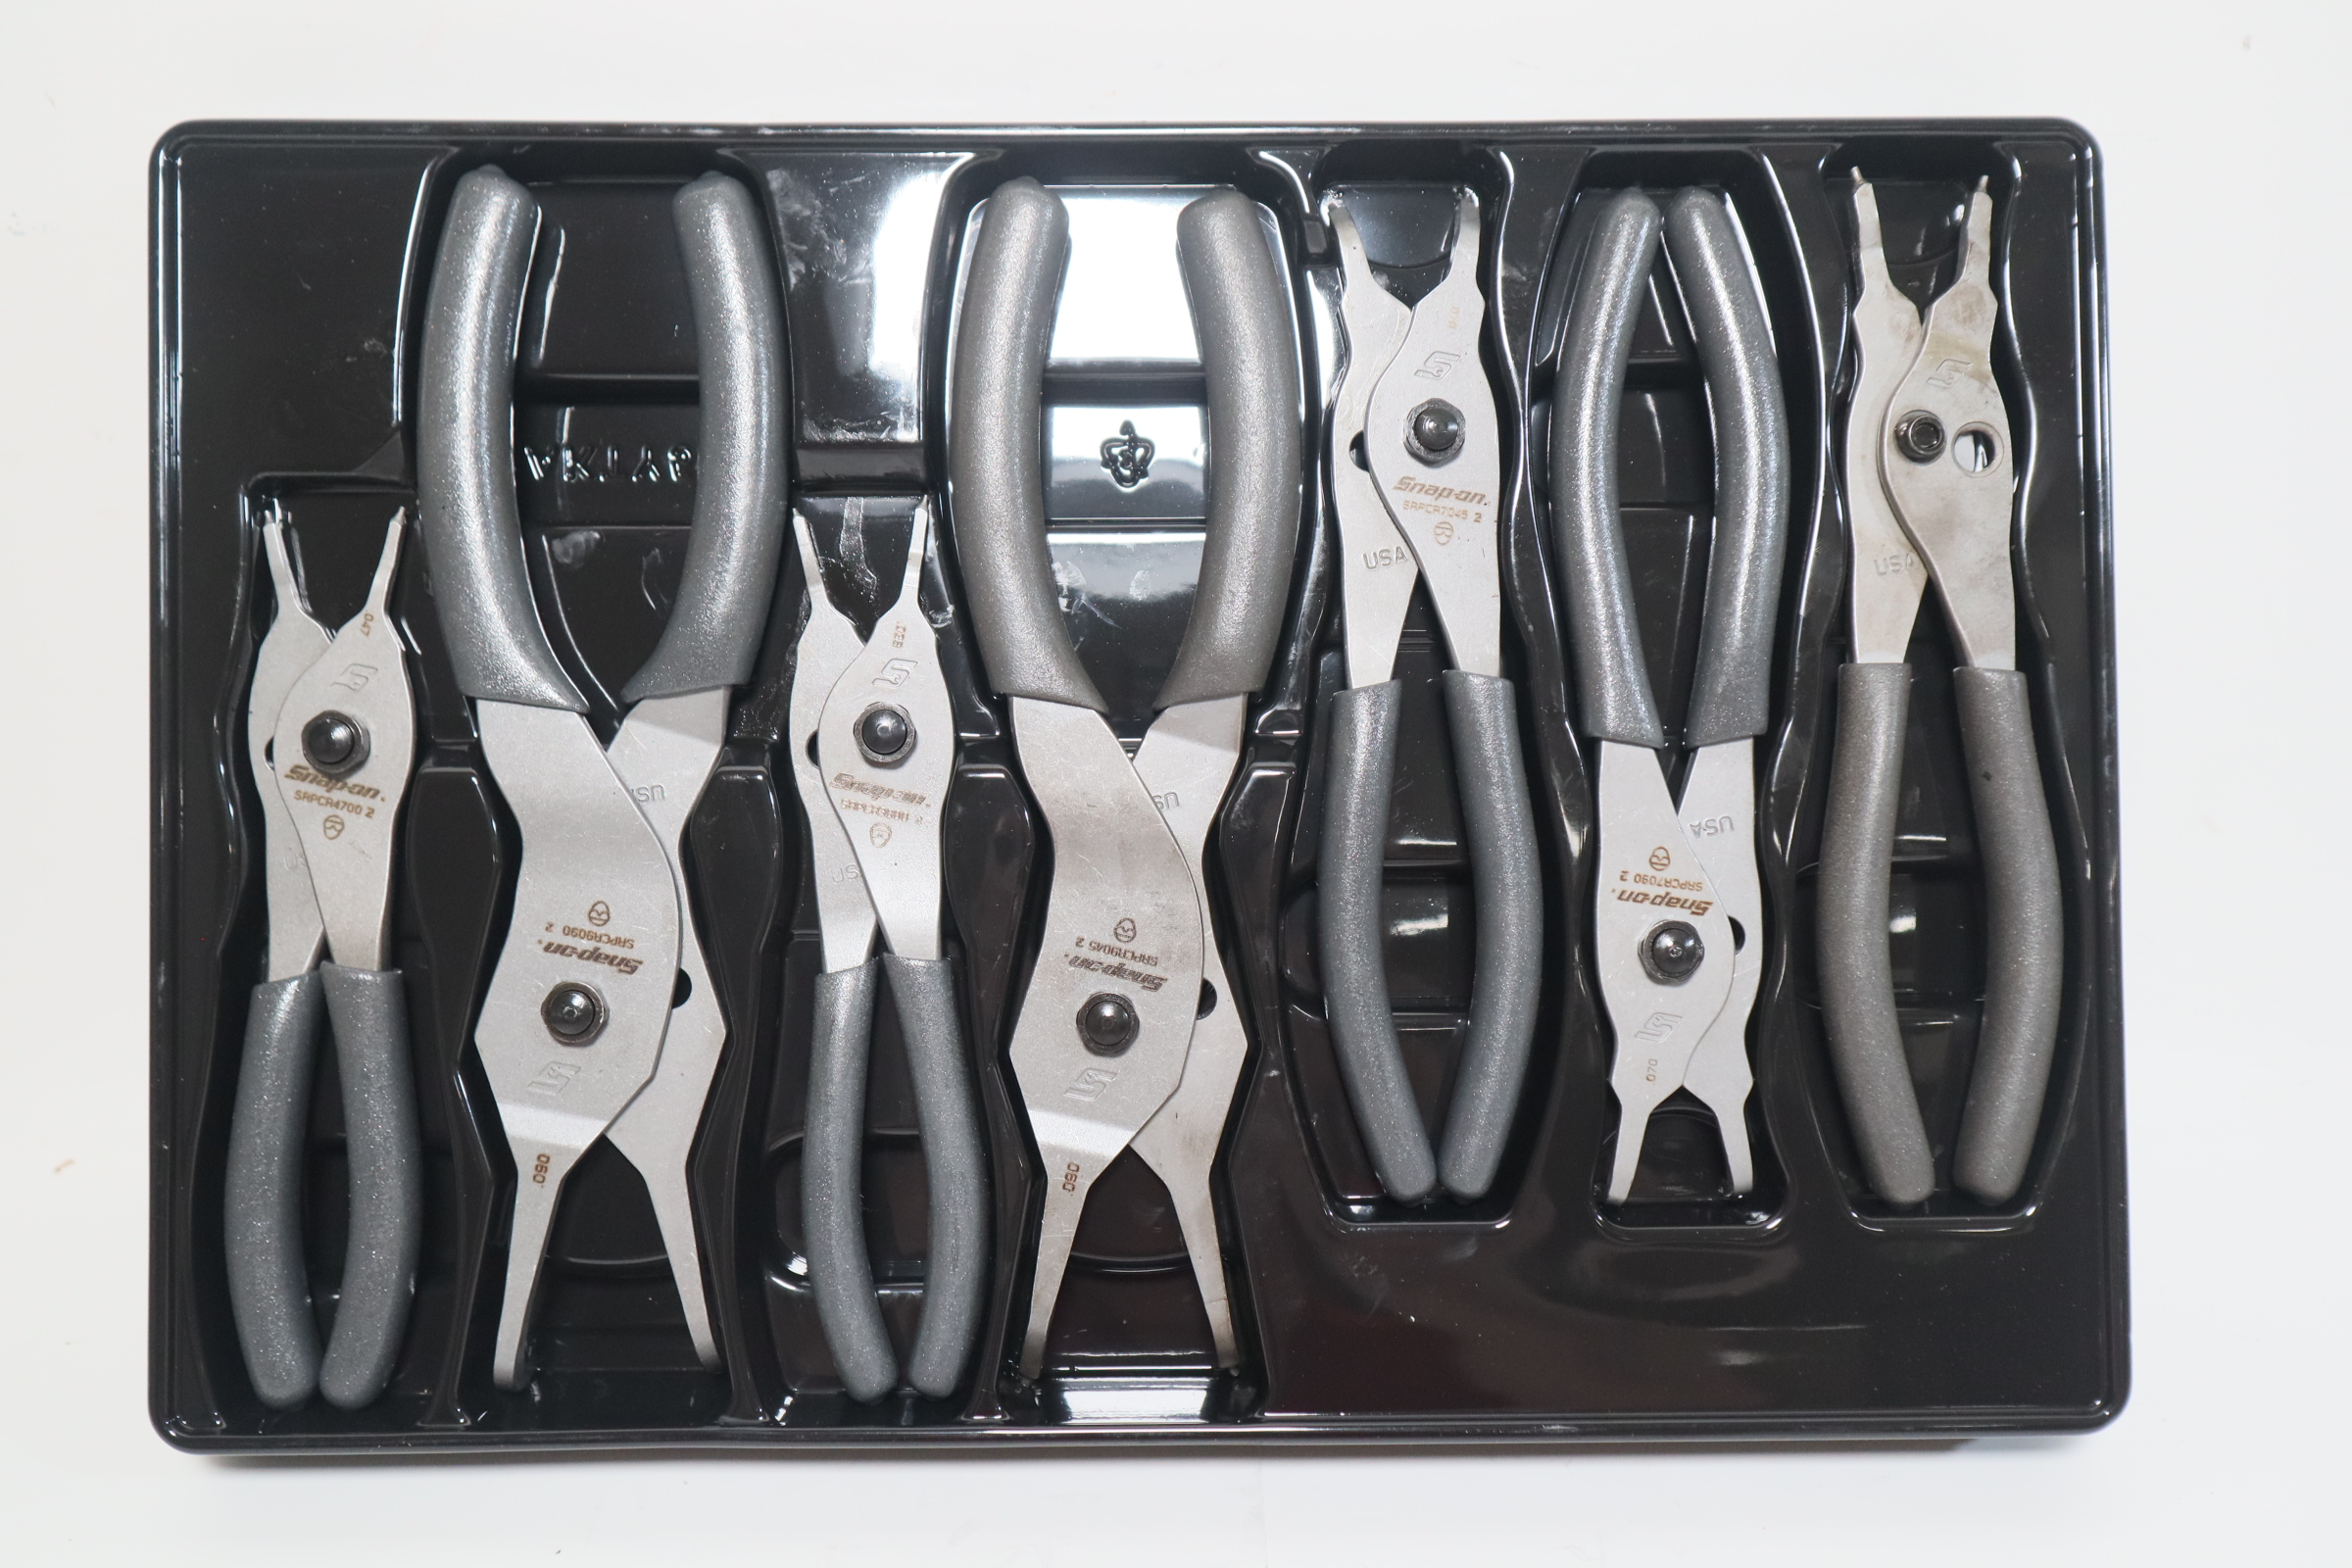 Snap-on 46PC 3/8 DR 6PT SAE Flank Drive Socket Set & 7PC Snap Ring Pliers  Set